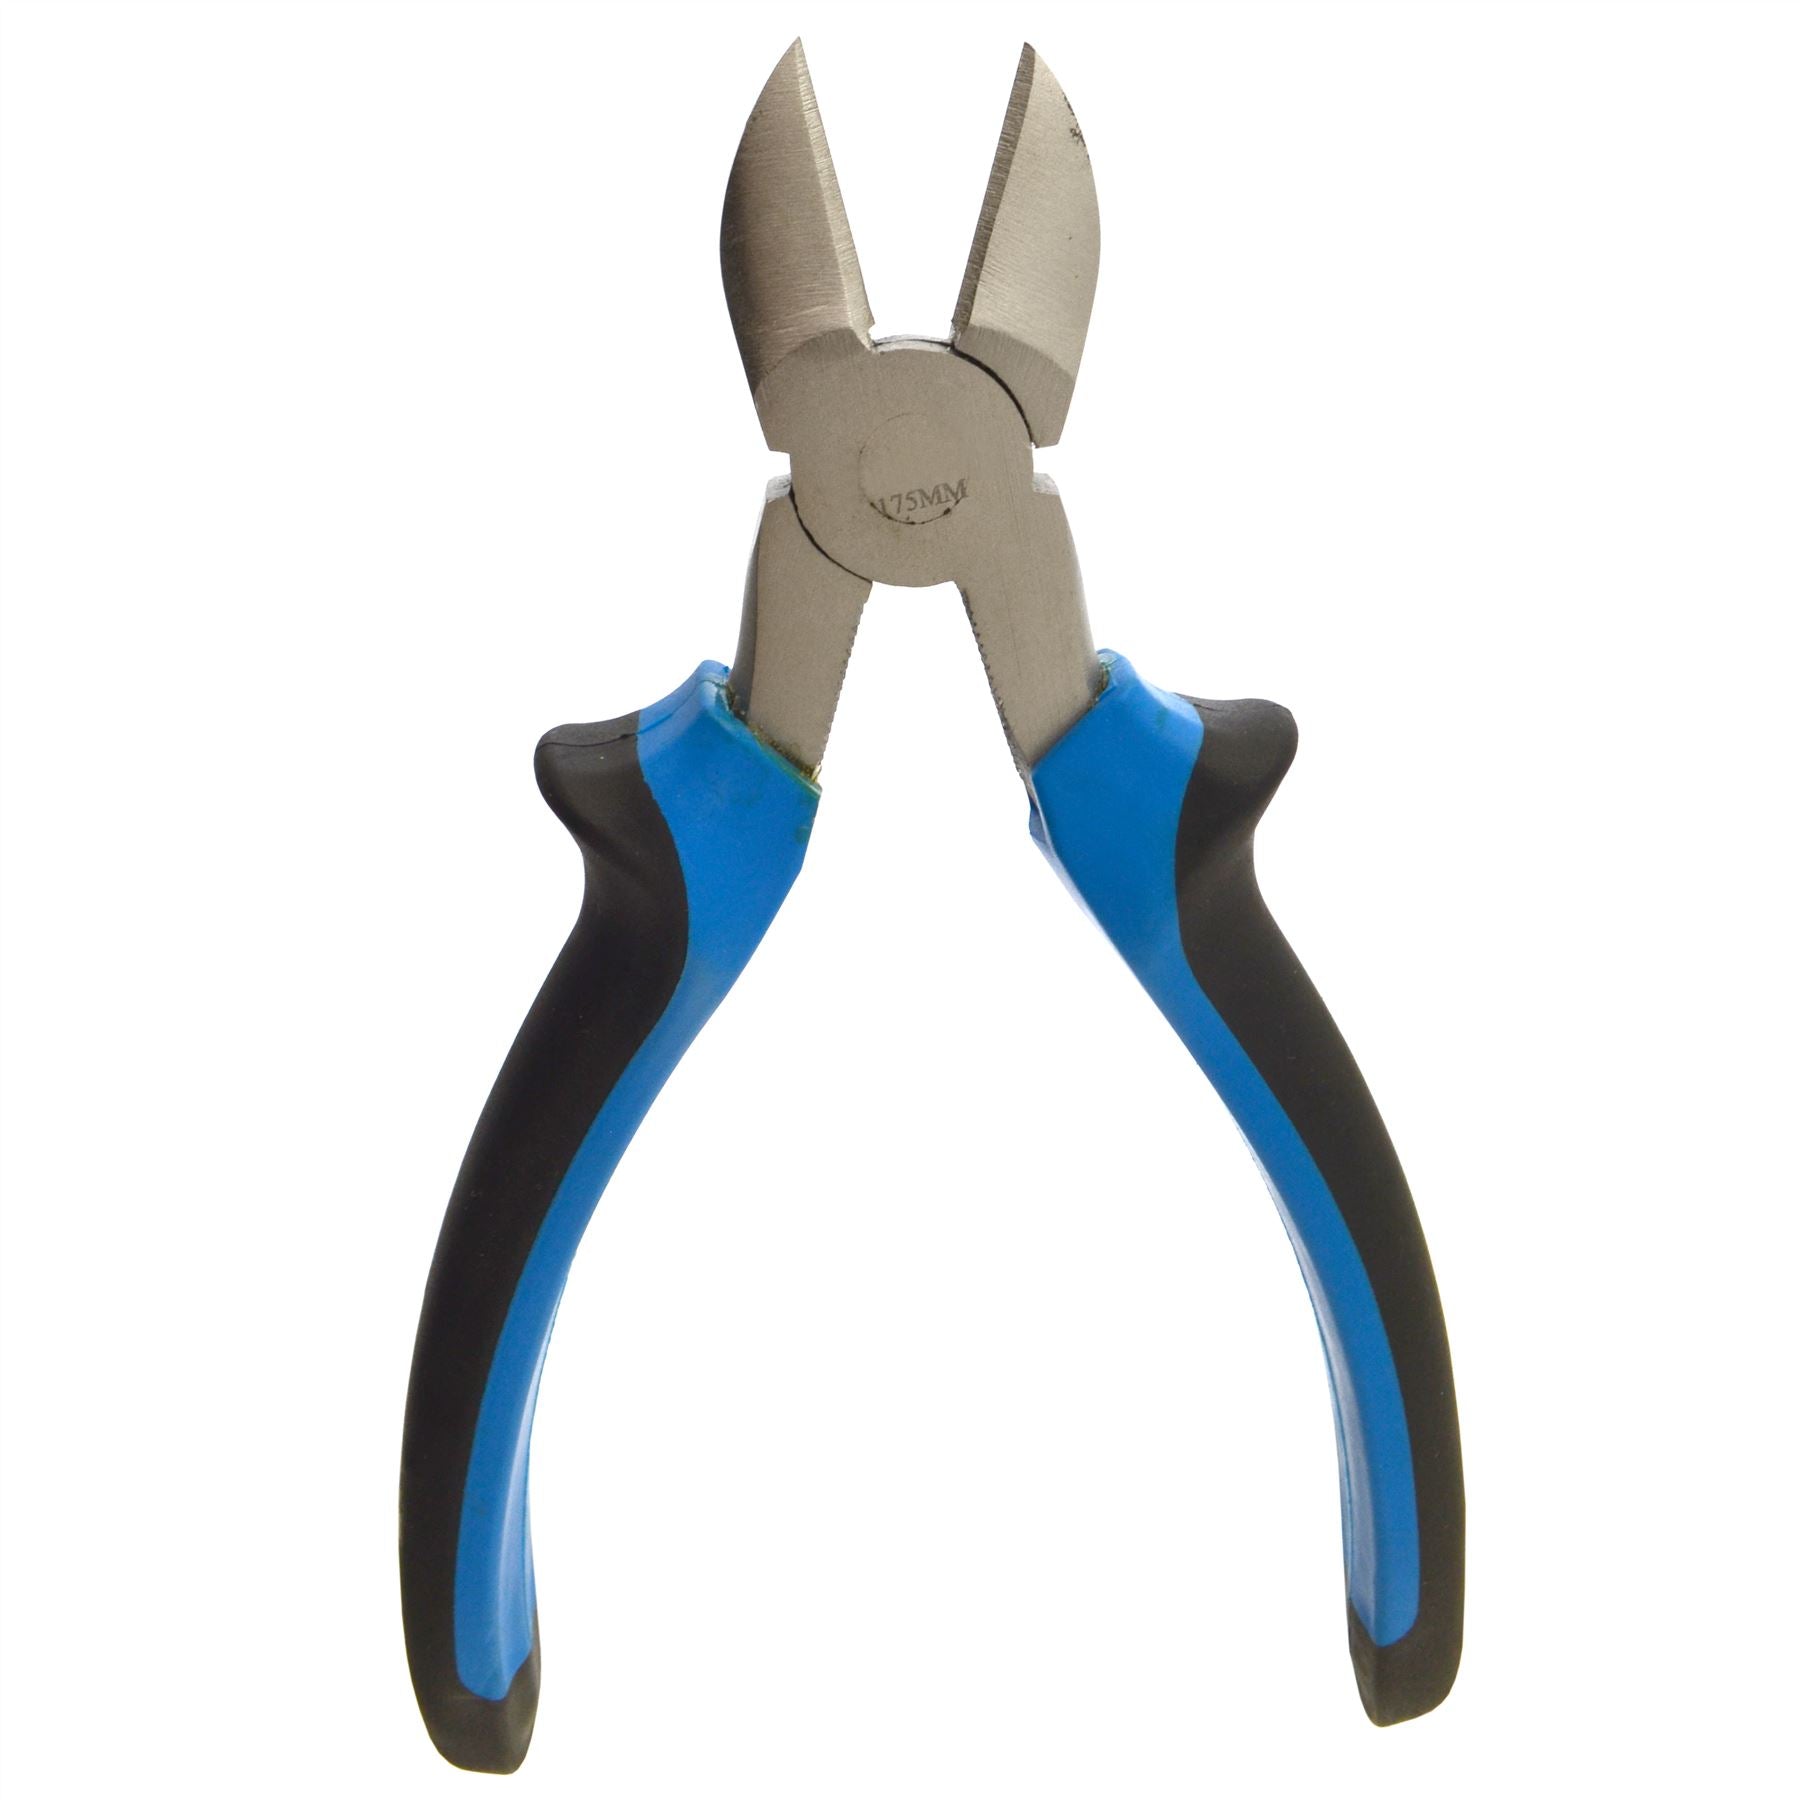 7" / 175mm Electrical Electricians Wire Cut Cutters Cutting Pliers Snips